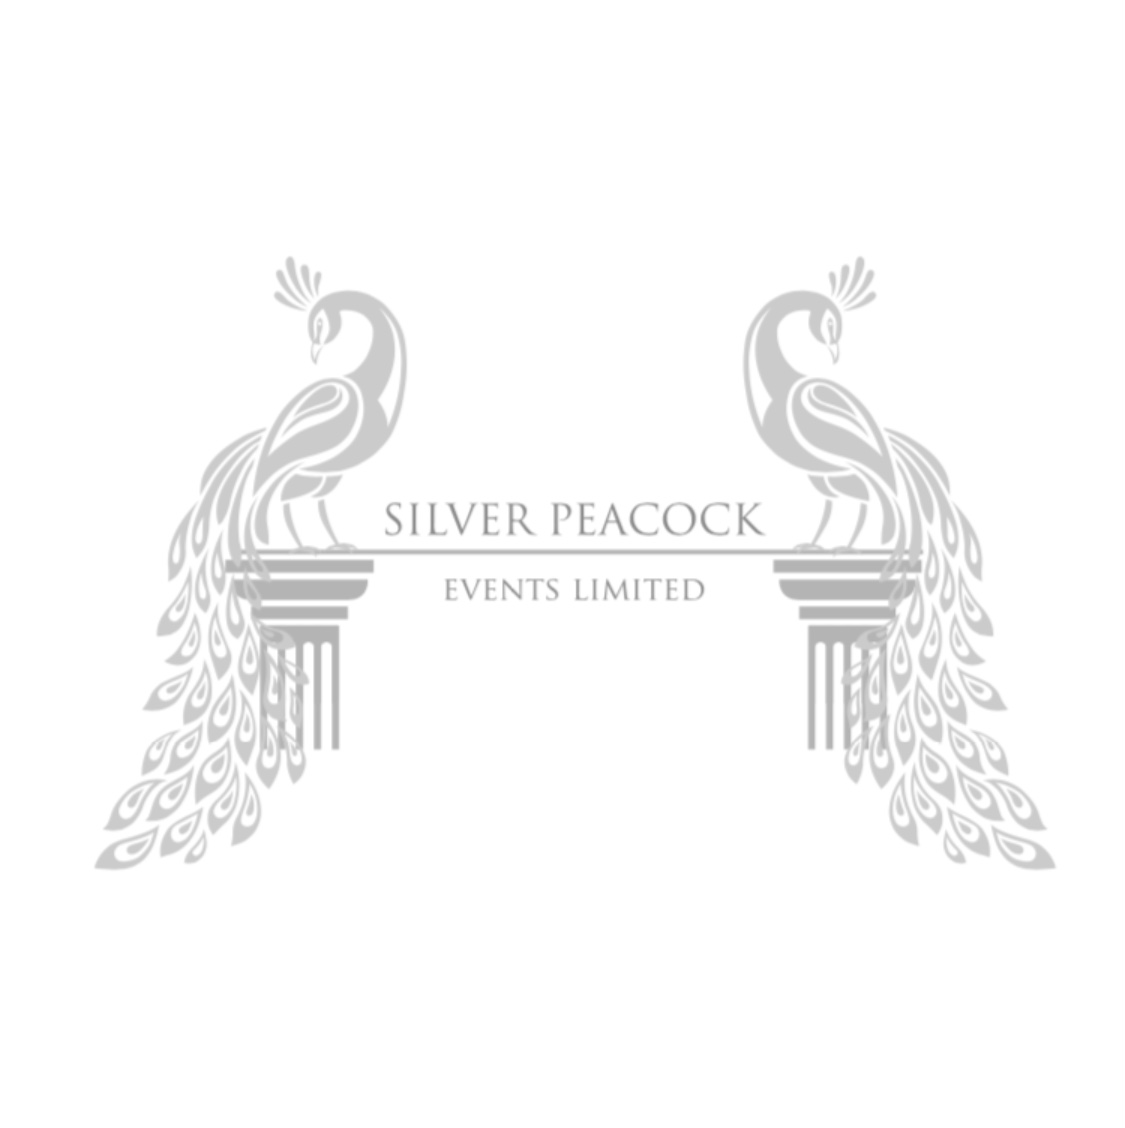 Silver Peacock Events Limited